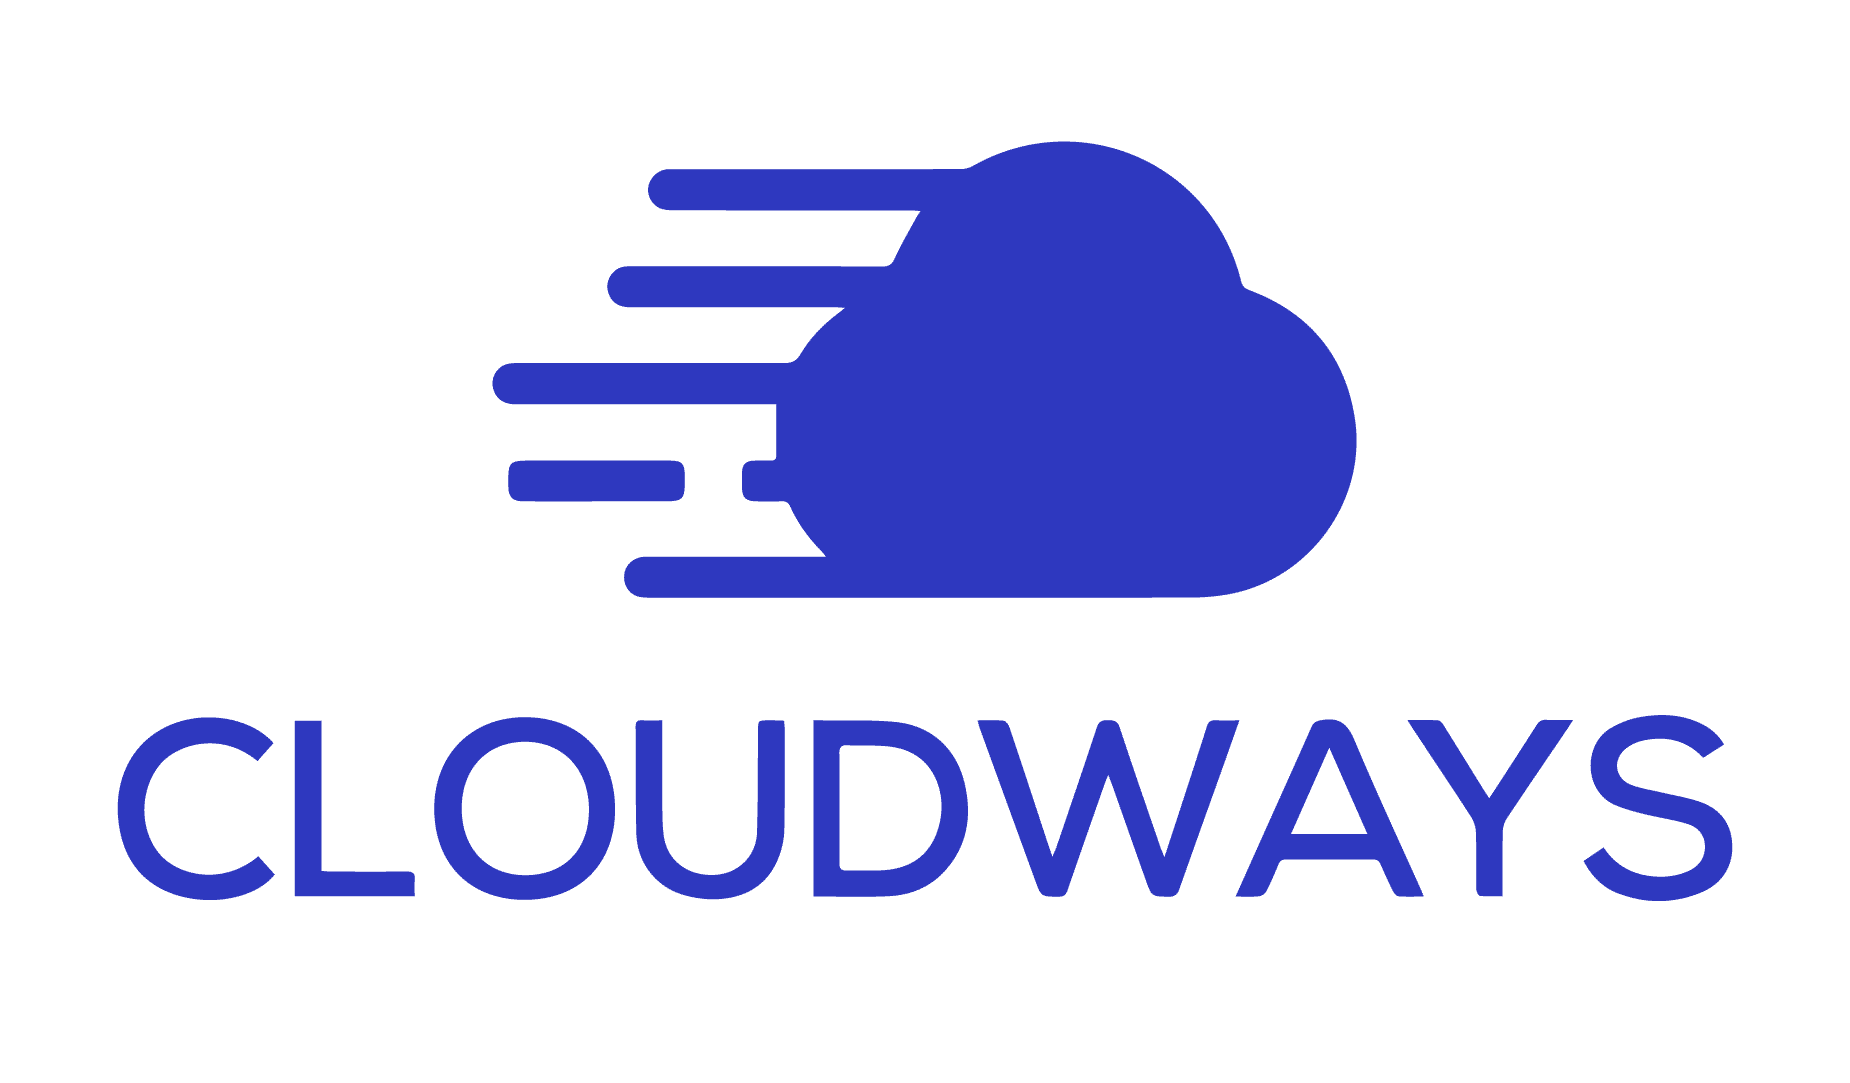 Moved all blogs to Cloudways